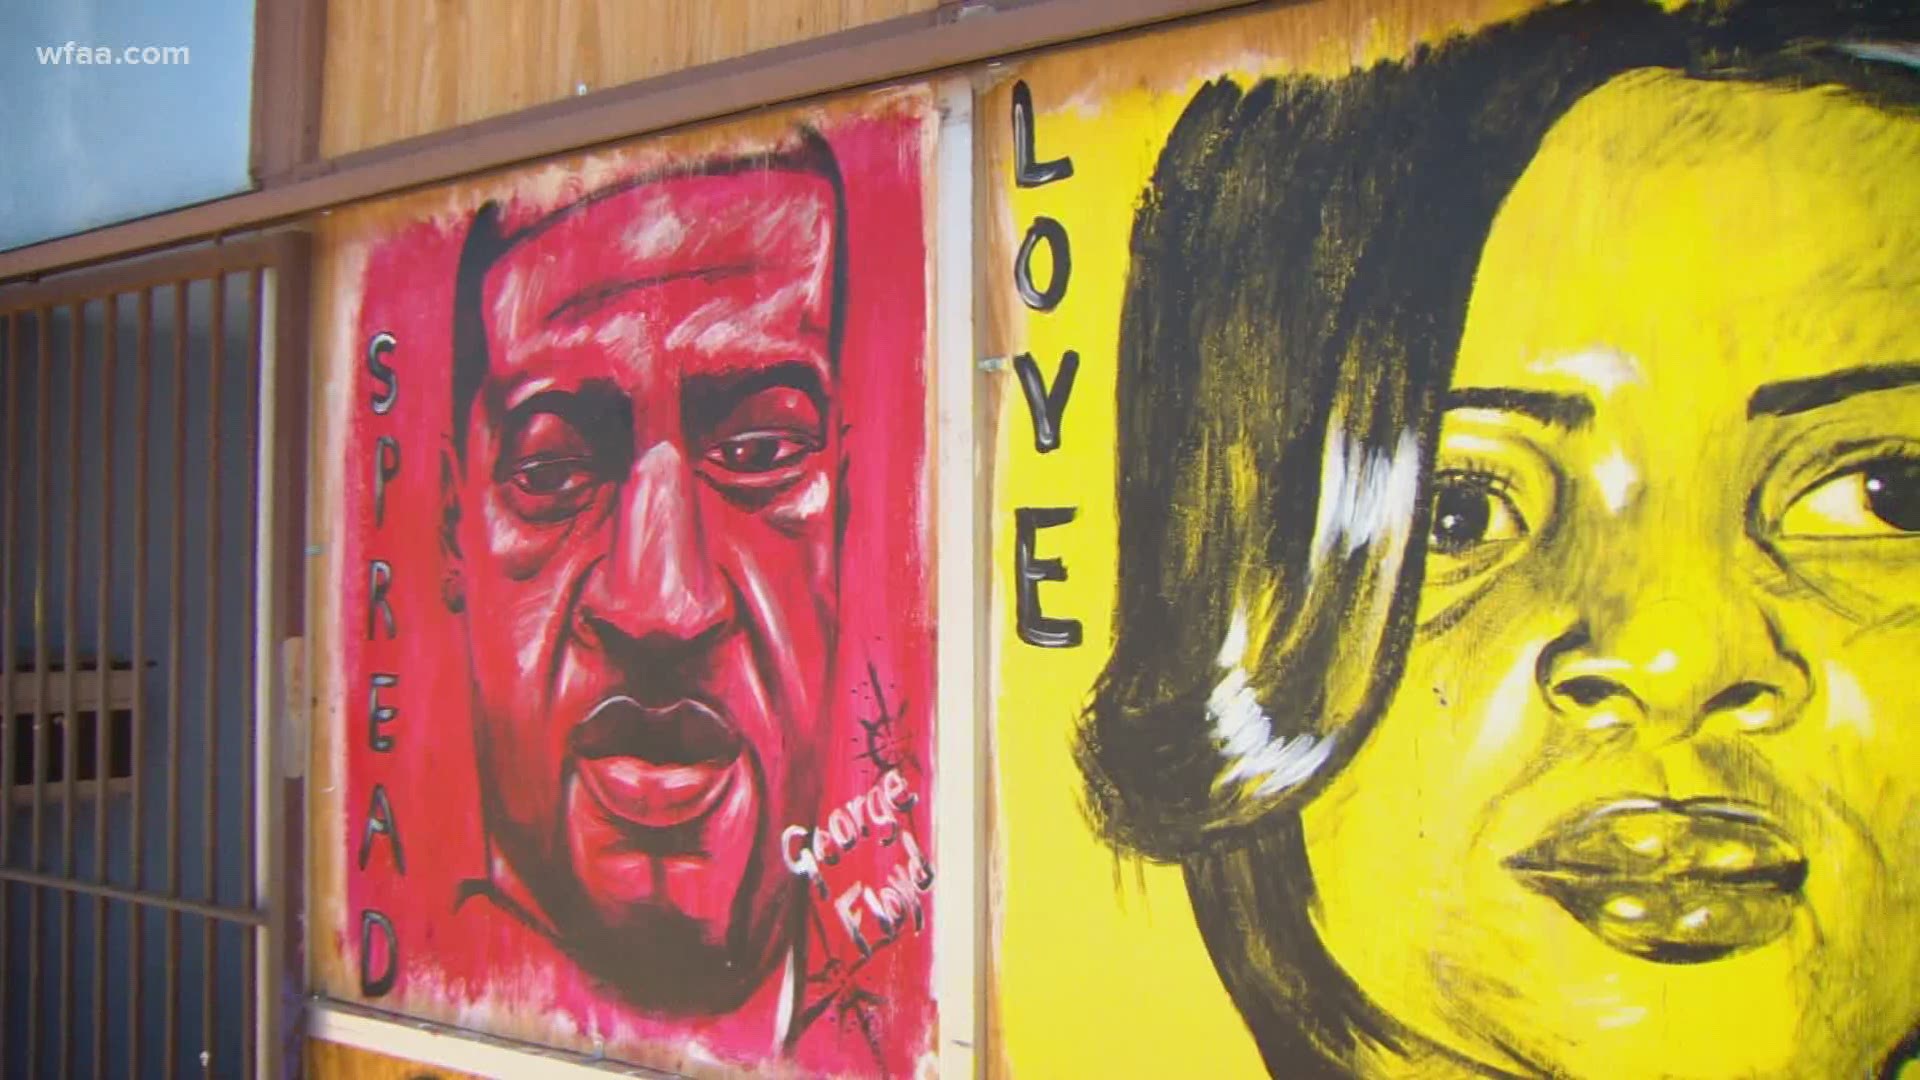 All protests aren't happening on the streets. Some local artists are using paint to address police brutality.